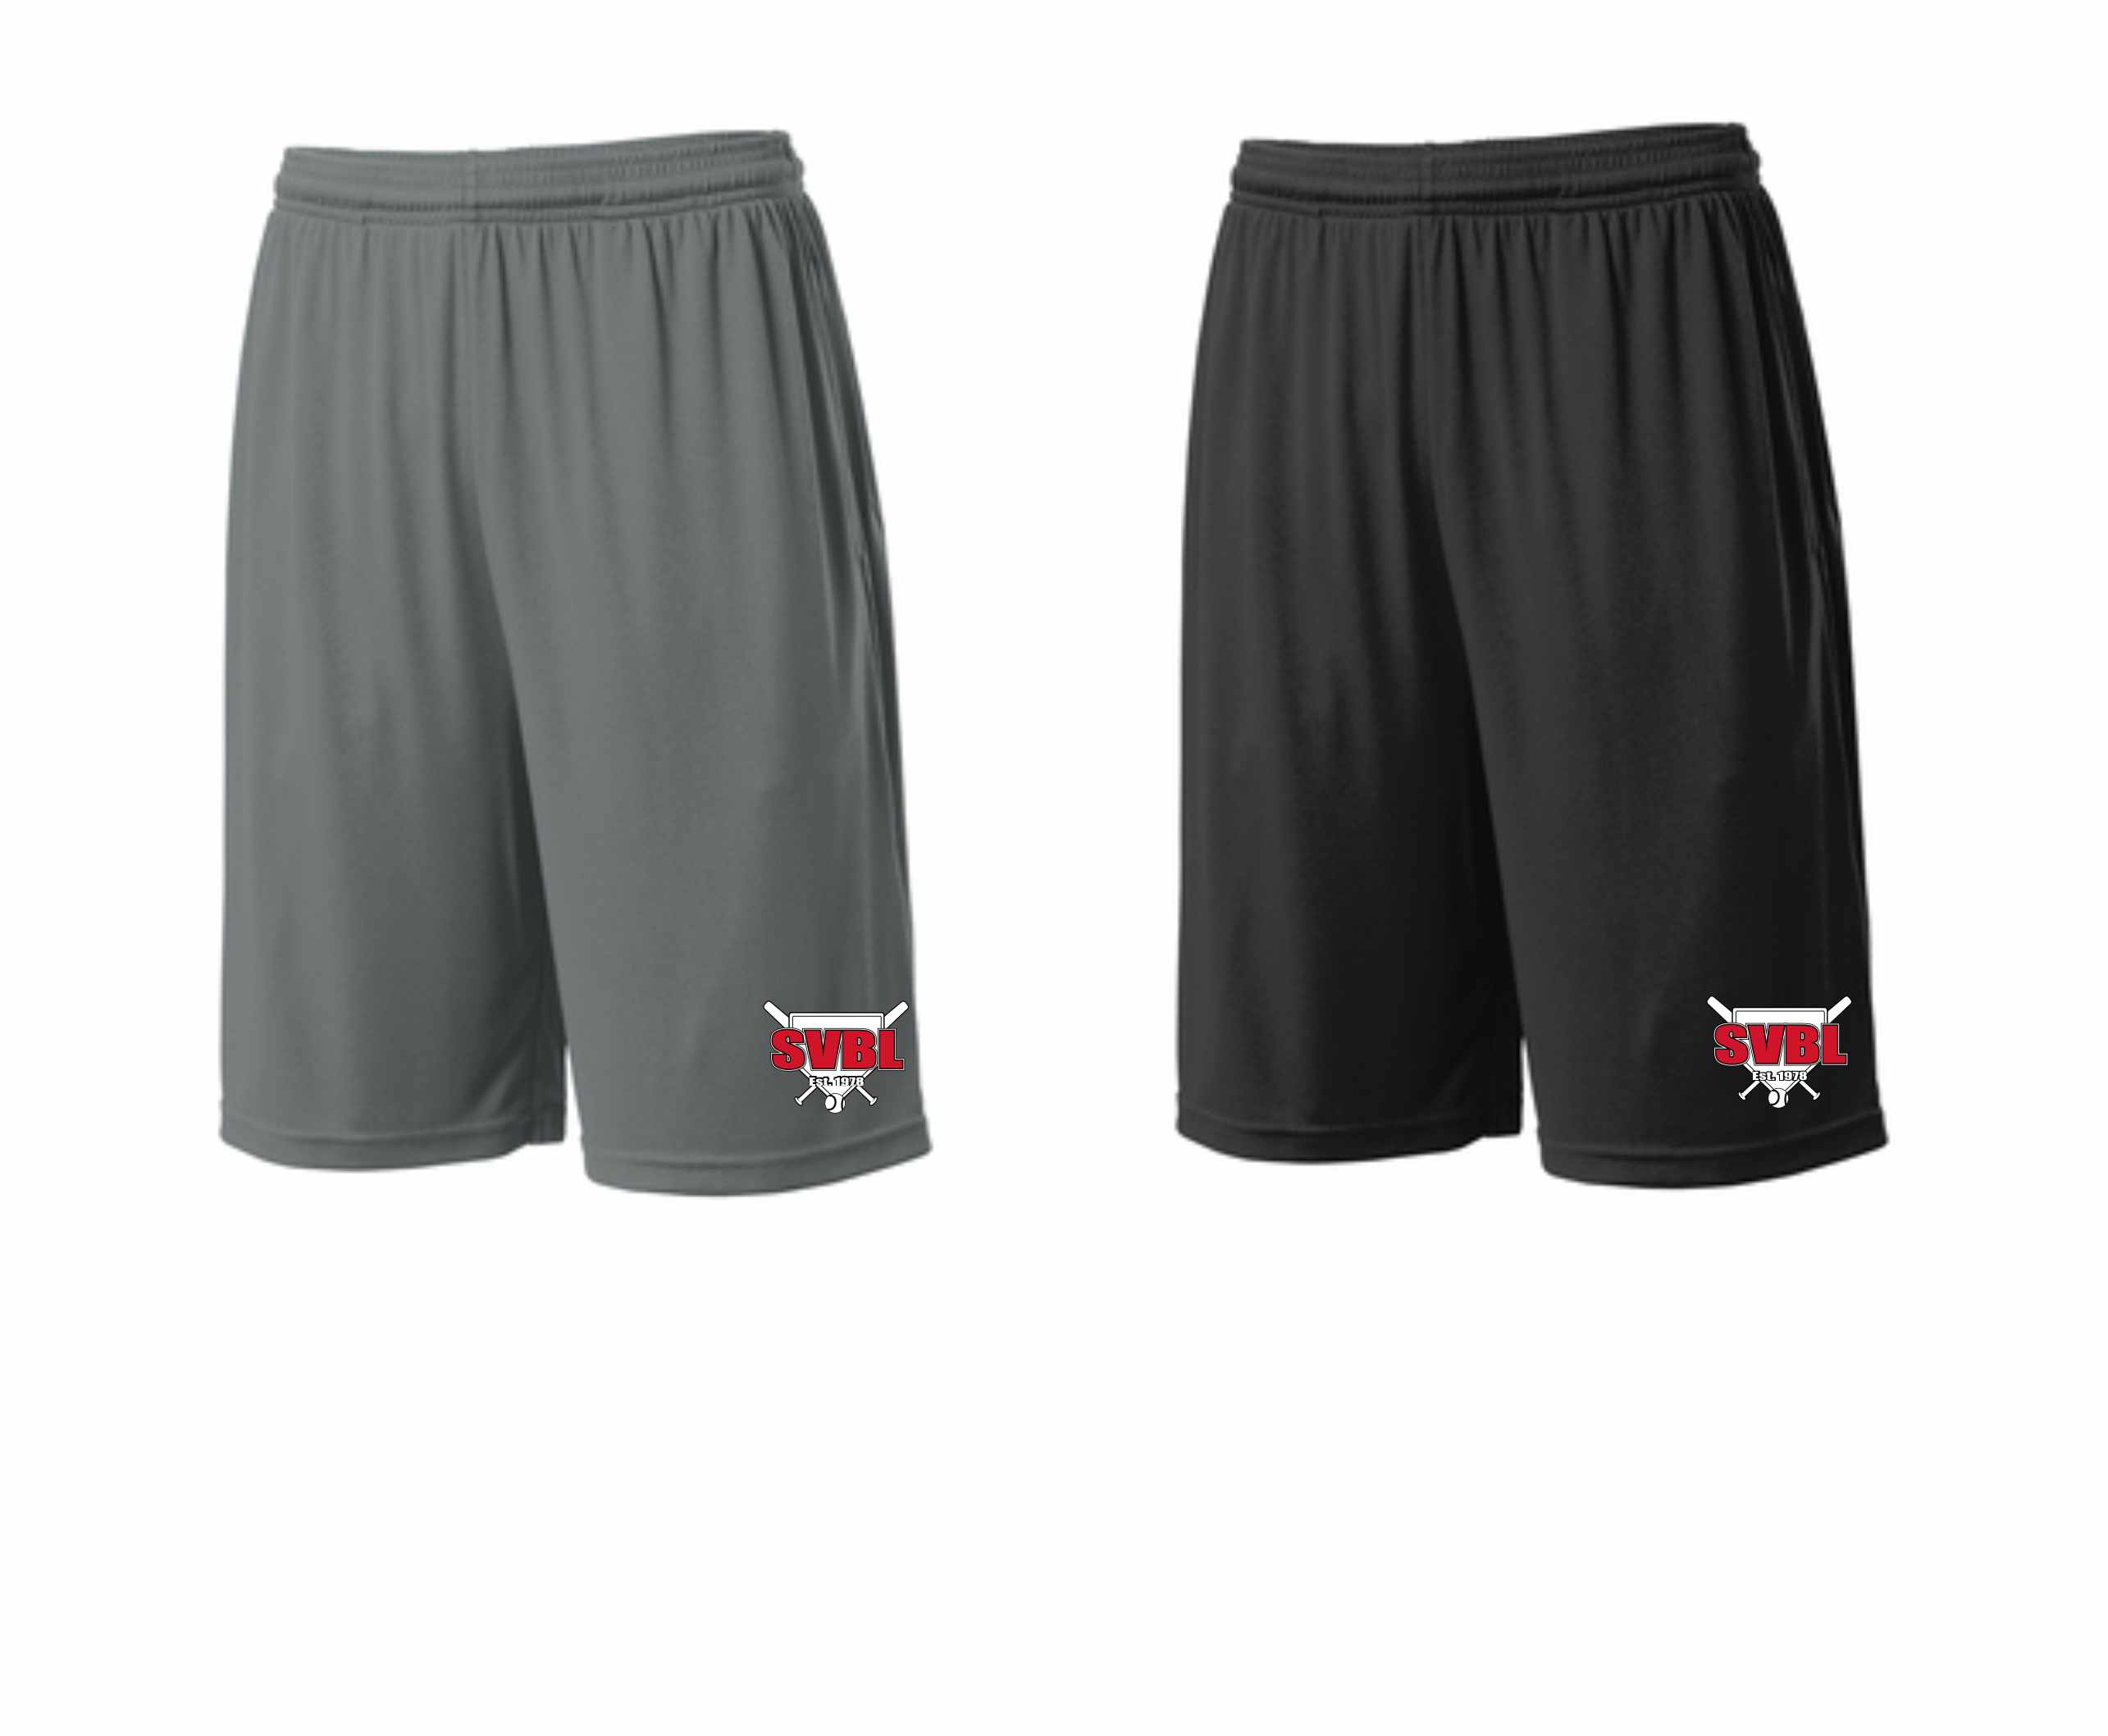 11 - Pocketed Dri-Fit Shorts